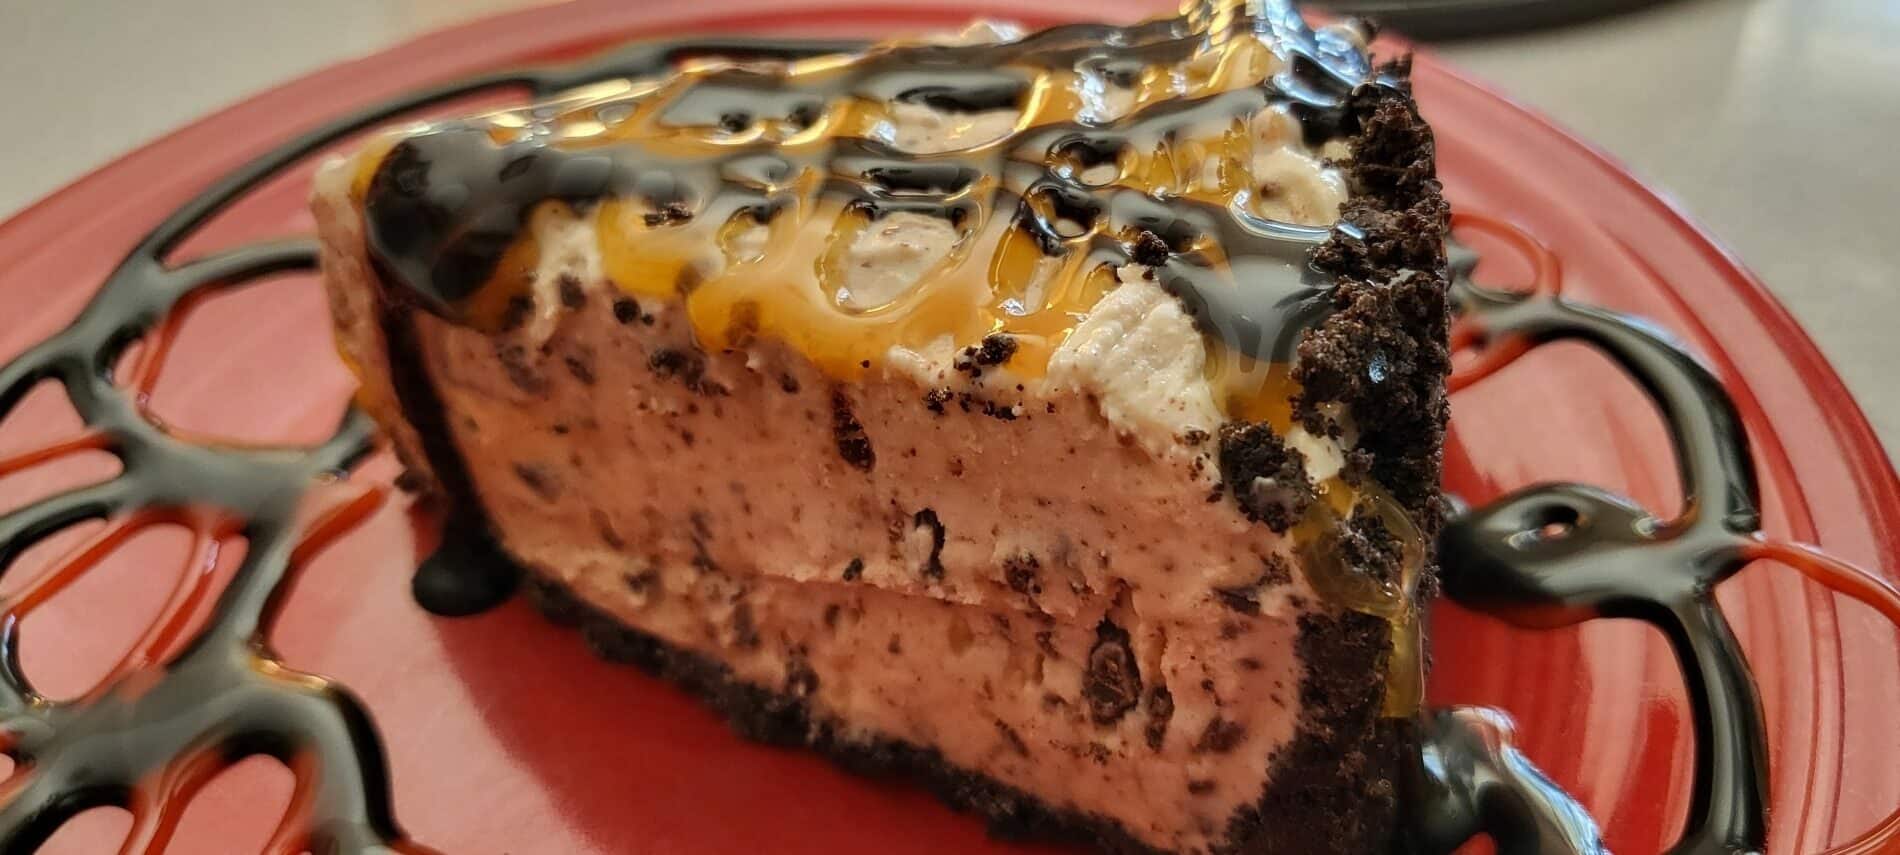 slice of chocolate chip and toffee ice cream pie in an Oreo cookie crust drizzled with caramel and chocolate sauce on a red plate